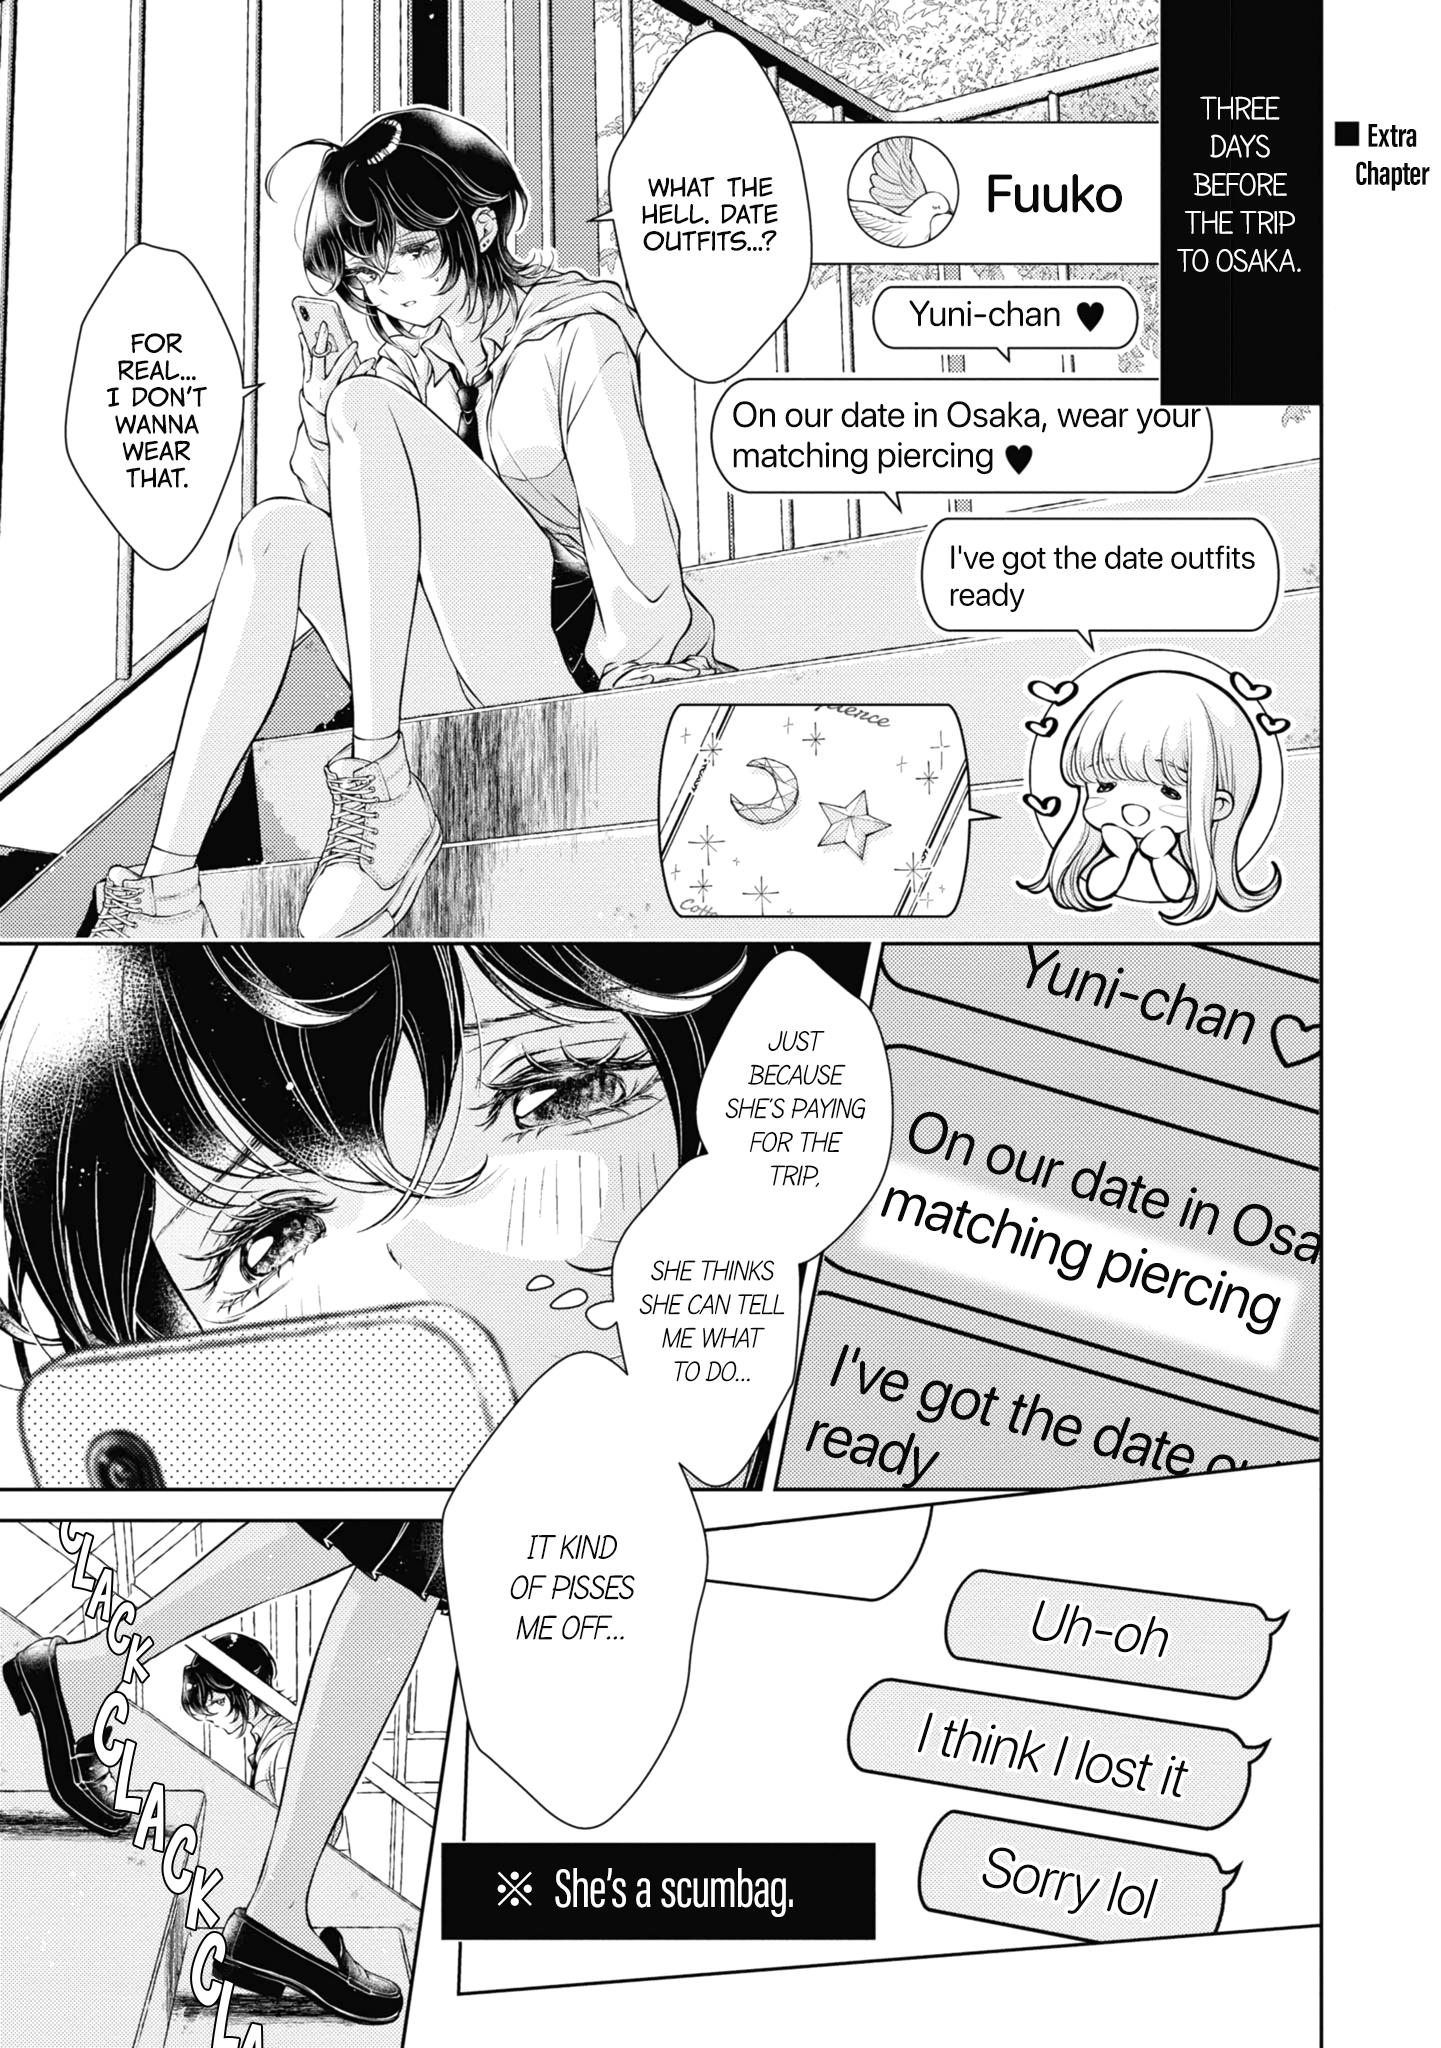 My Girlfriend’S Not Here Today Vol.2 Chapter 10.5: Afterword And Extra Pages Volume 2 - Picture 1